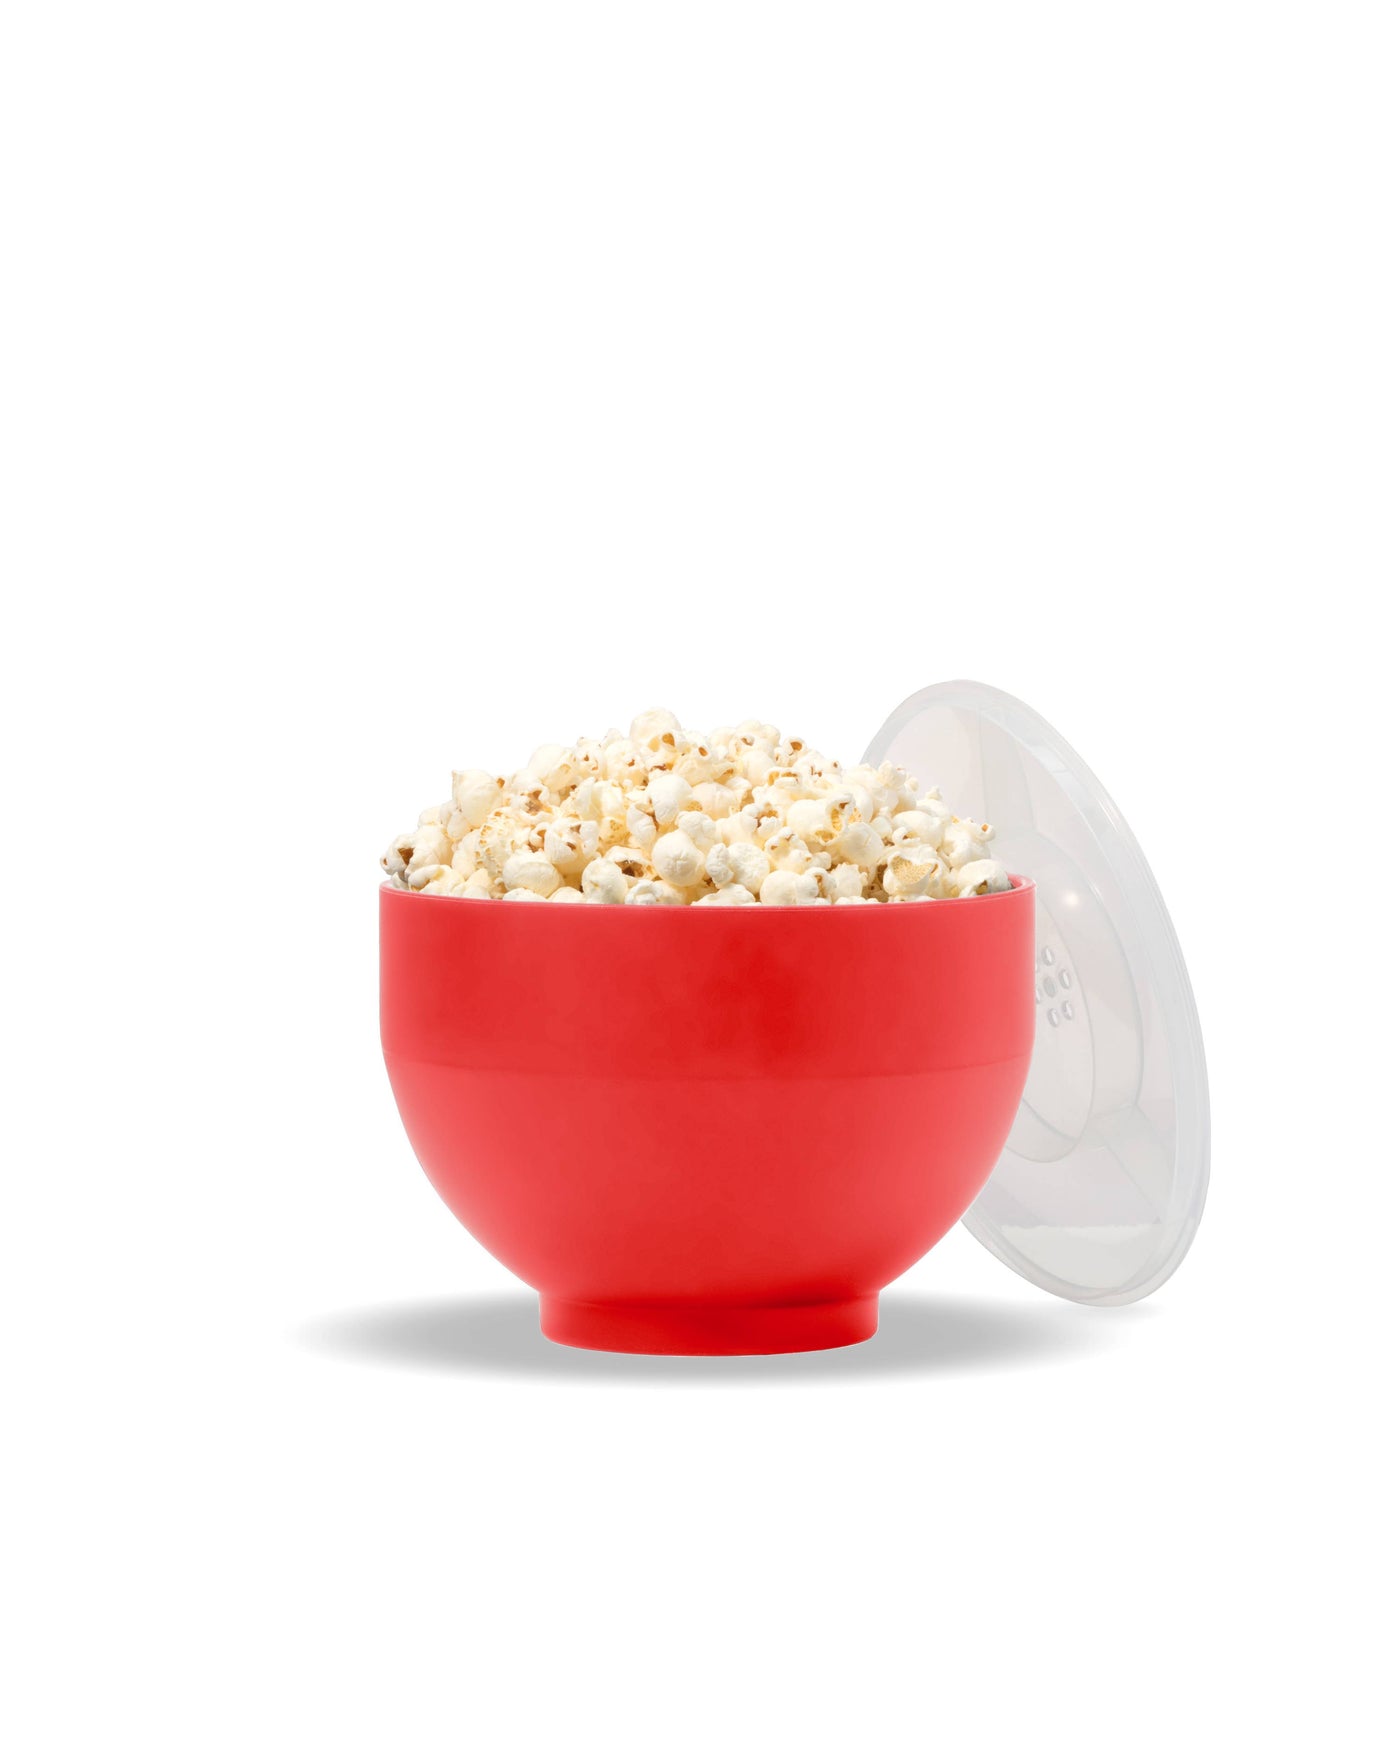 Popcorn Popper Silicone Reusable Maker - Standard Size: Charcoal